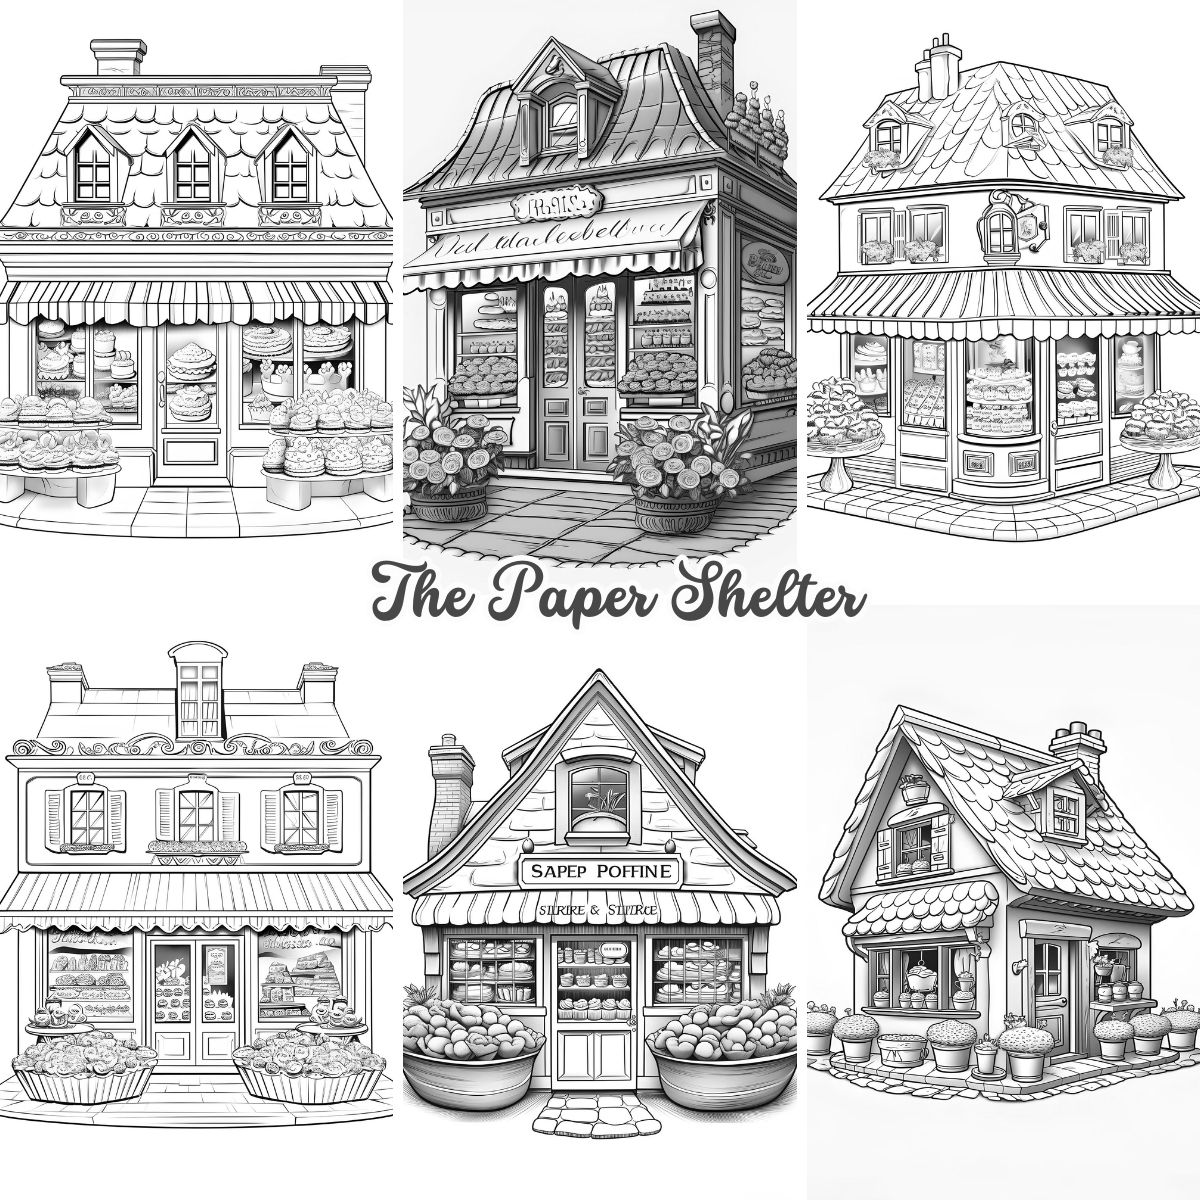 French Bakeries - Digital Coloring Book